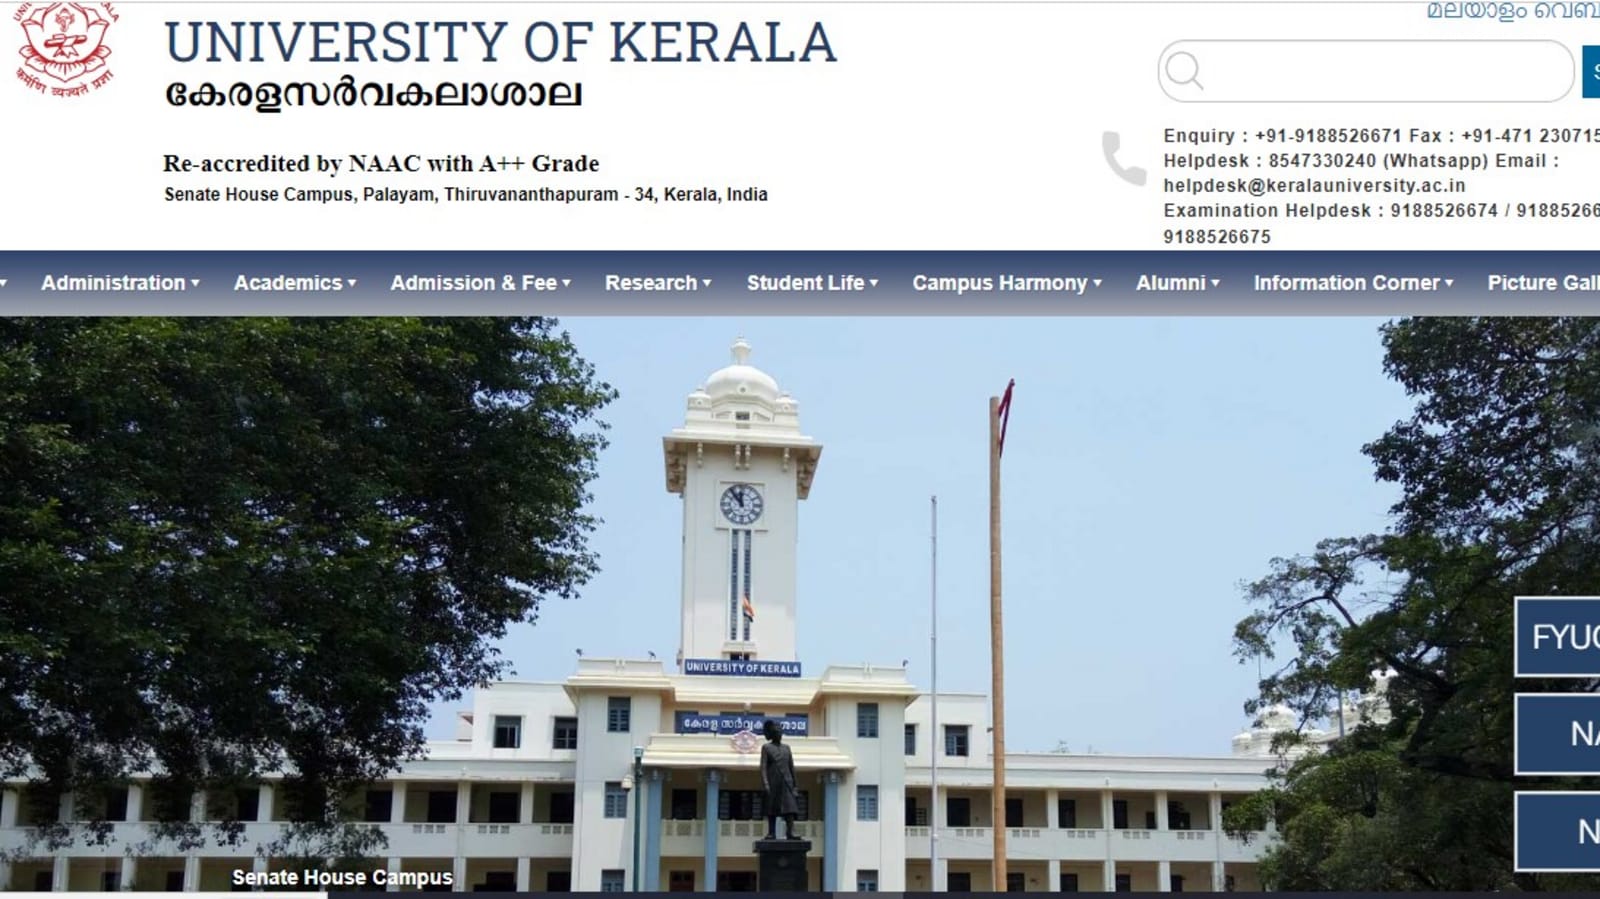 University of Kerala releases UG and PG exam results at keralauniversity.ac.in, get direct link here